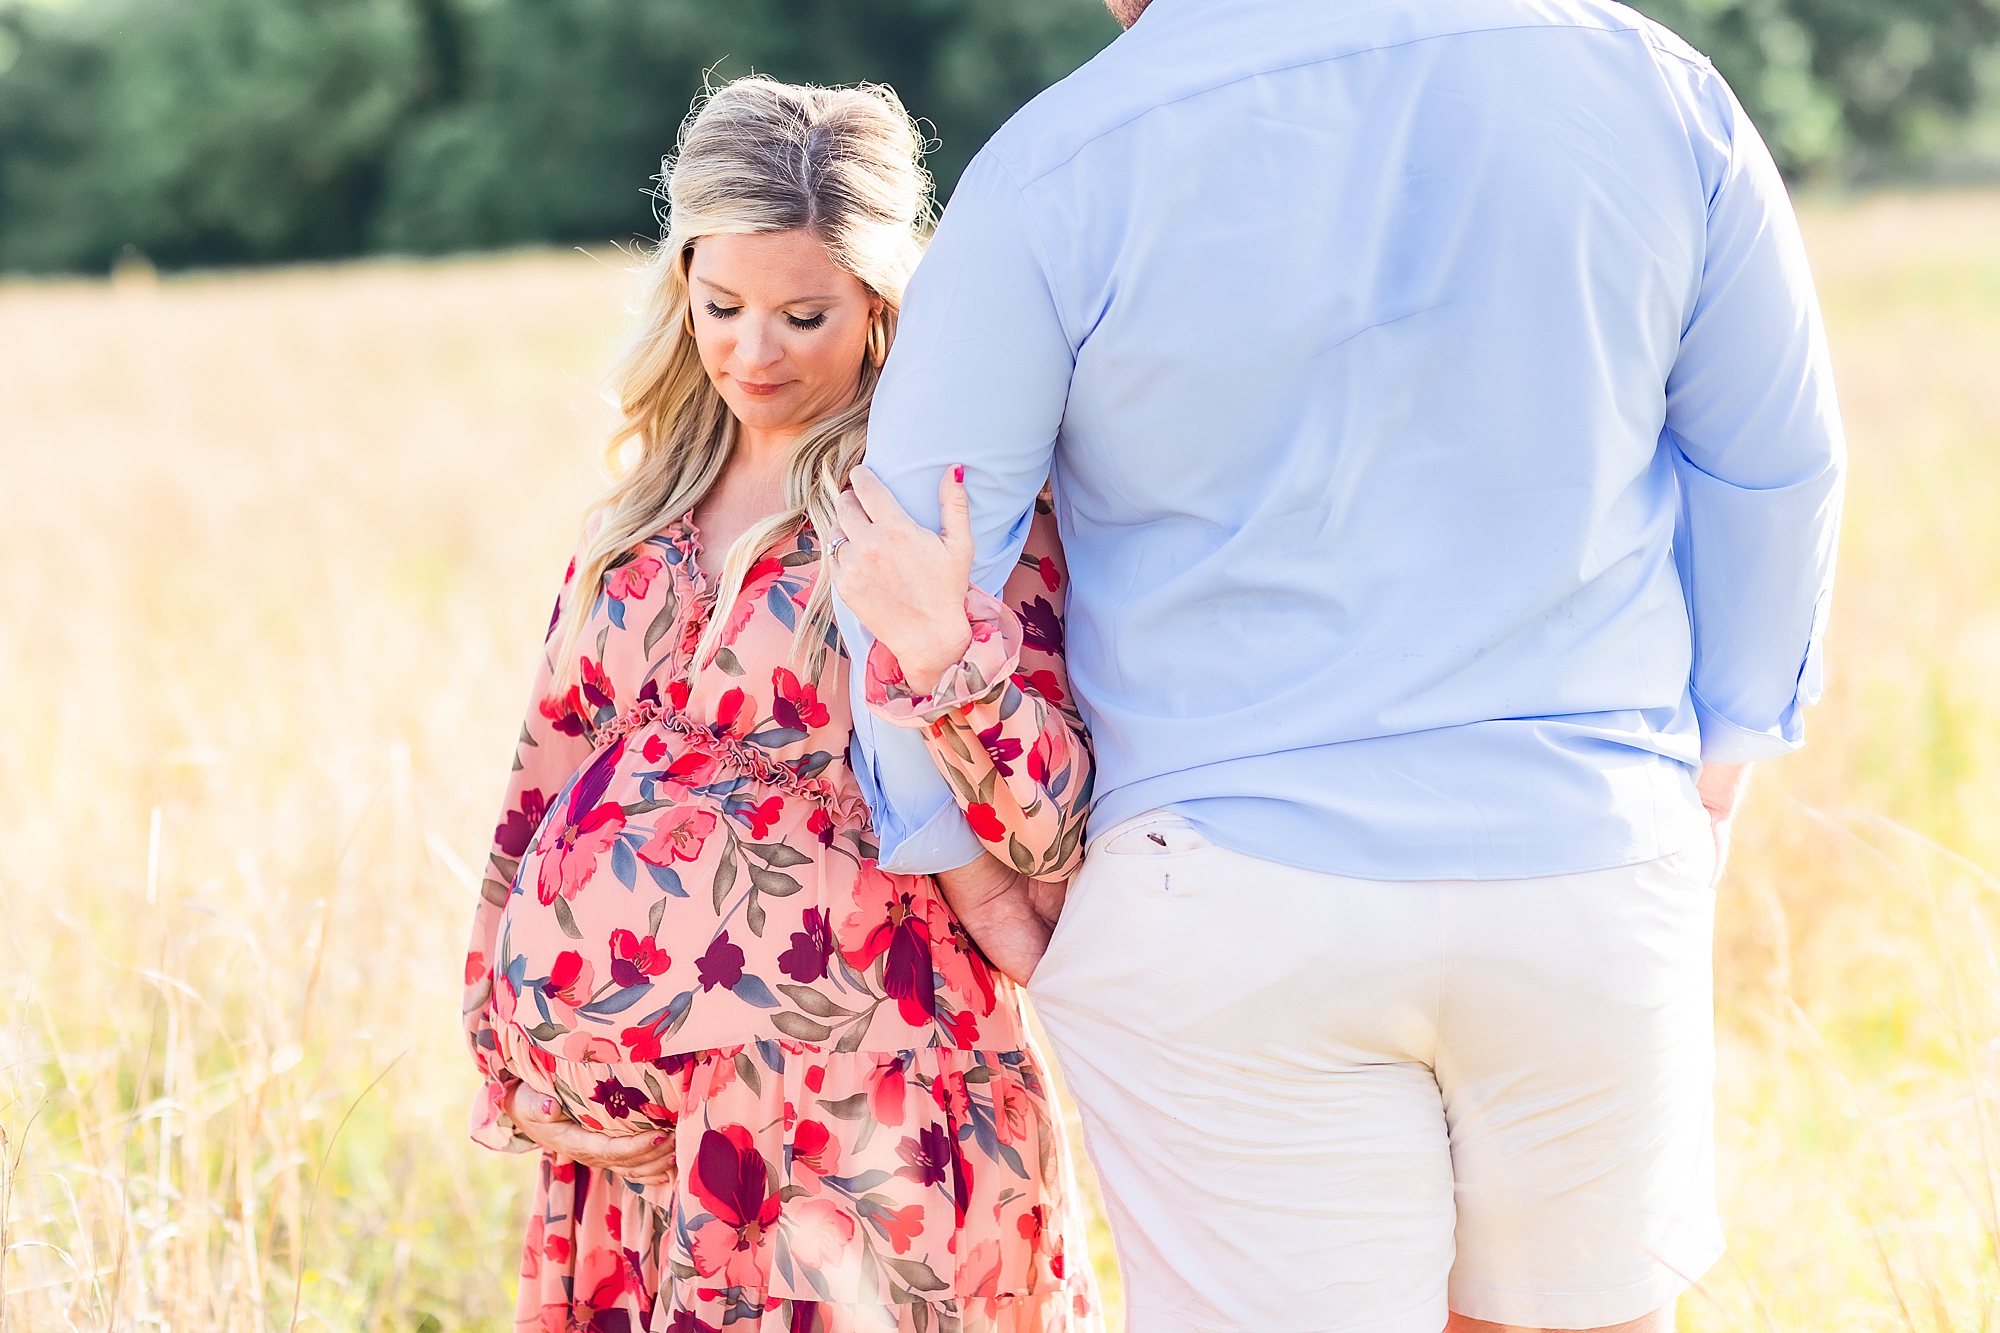 mom leans against husband's arm during maternity portraits in Charlotte field